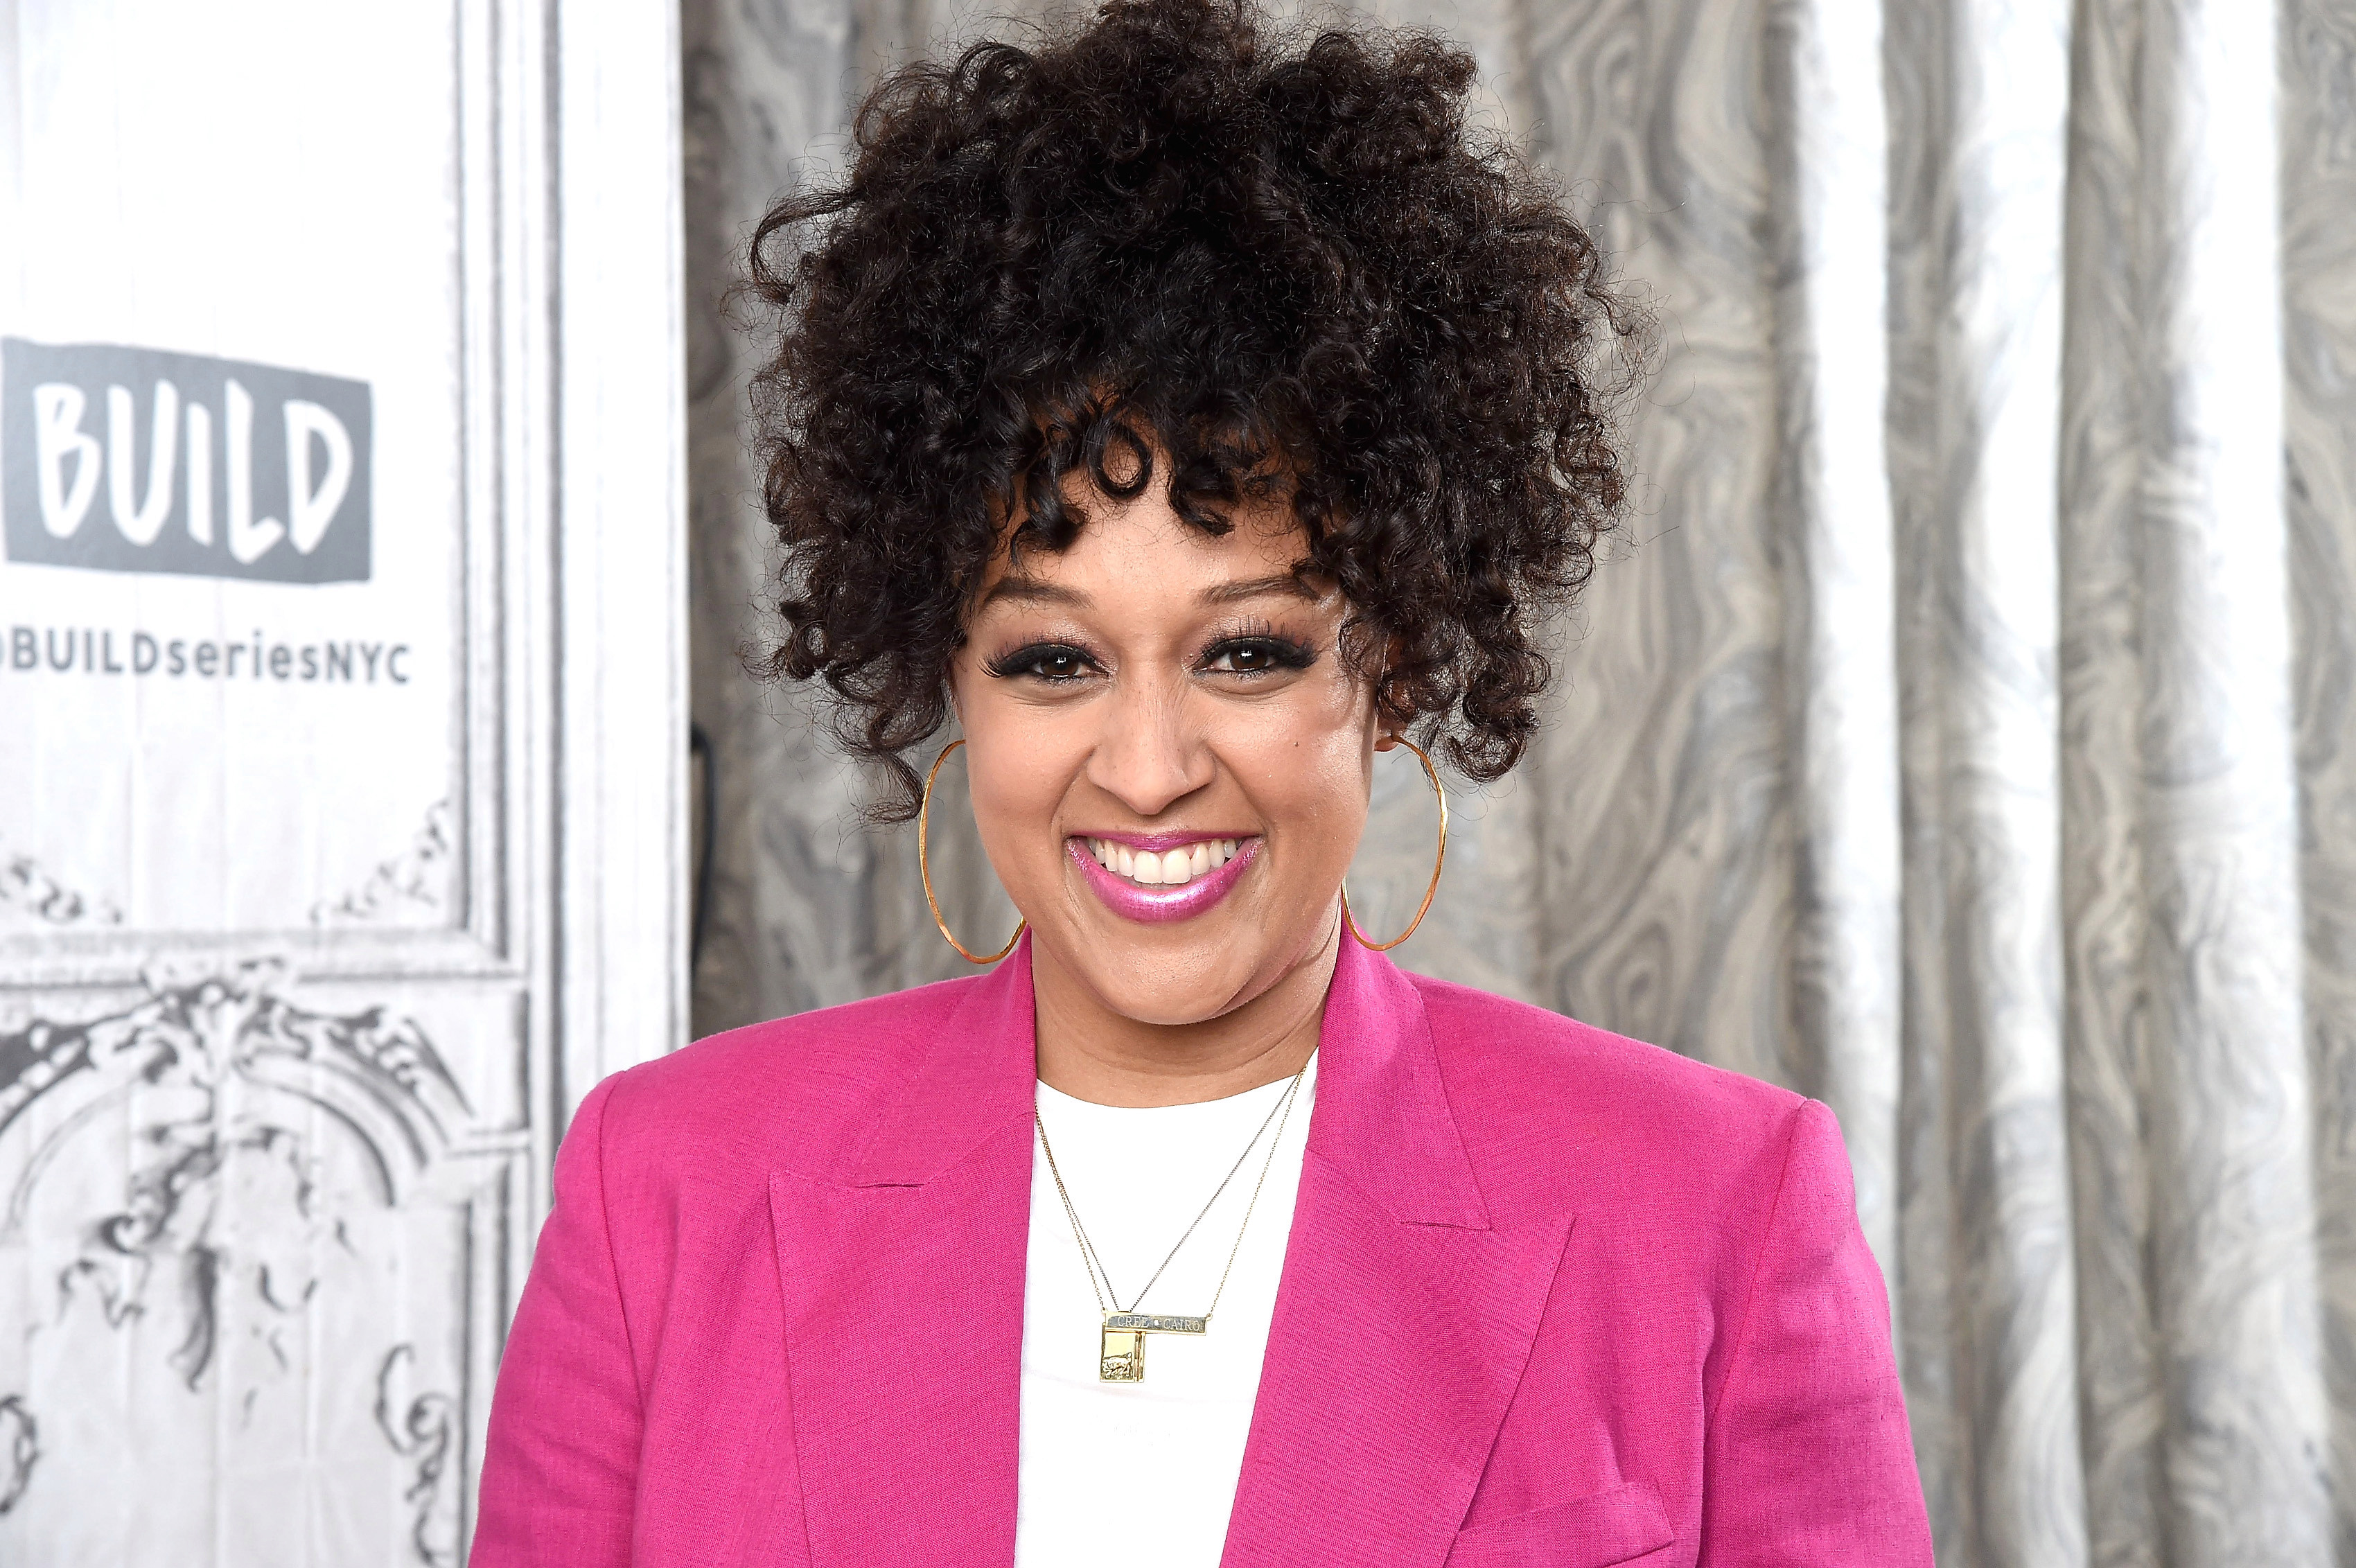 Sister Sister’s Tia Mowry told her afro curls ‘was distracting’ in auditions